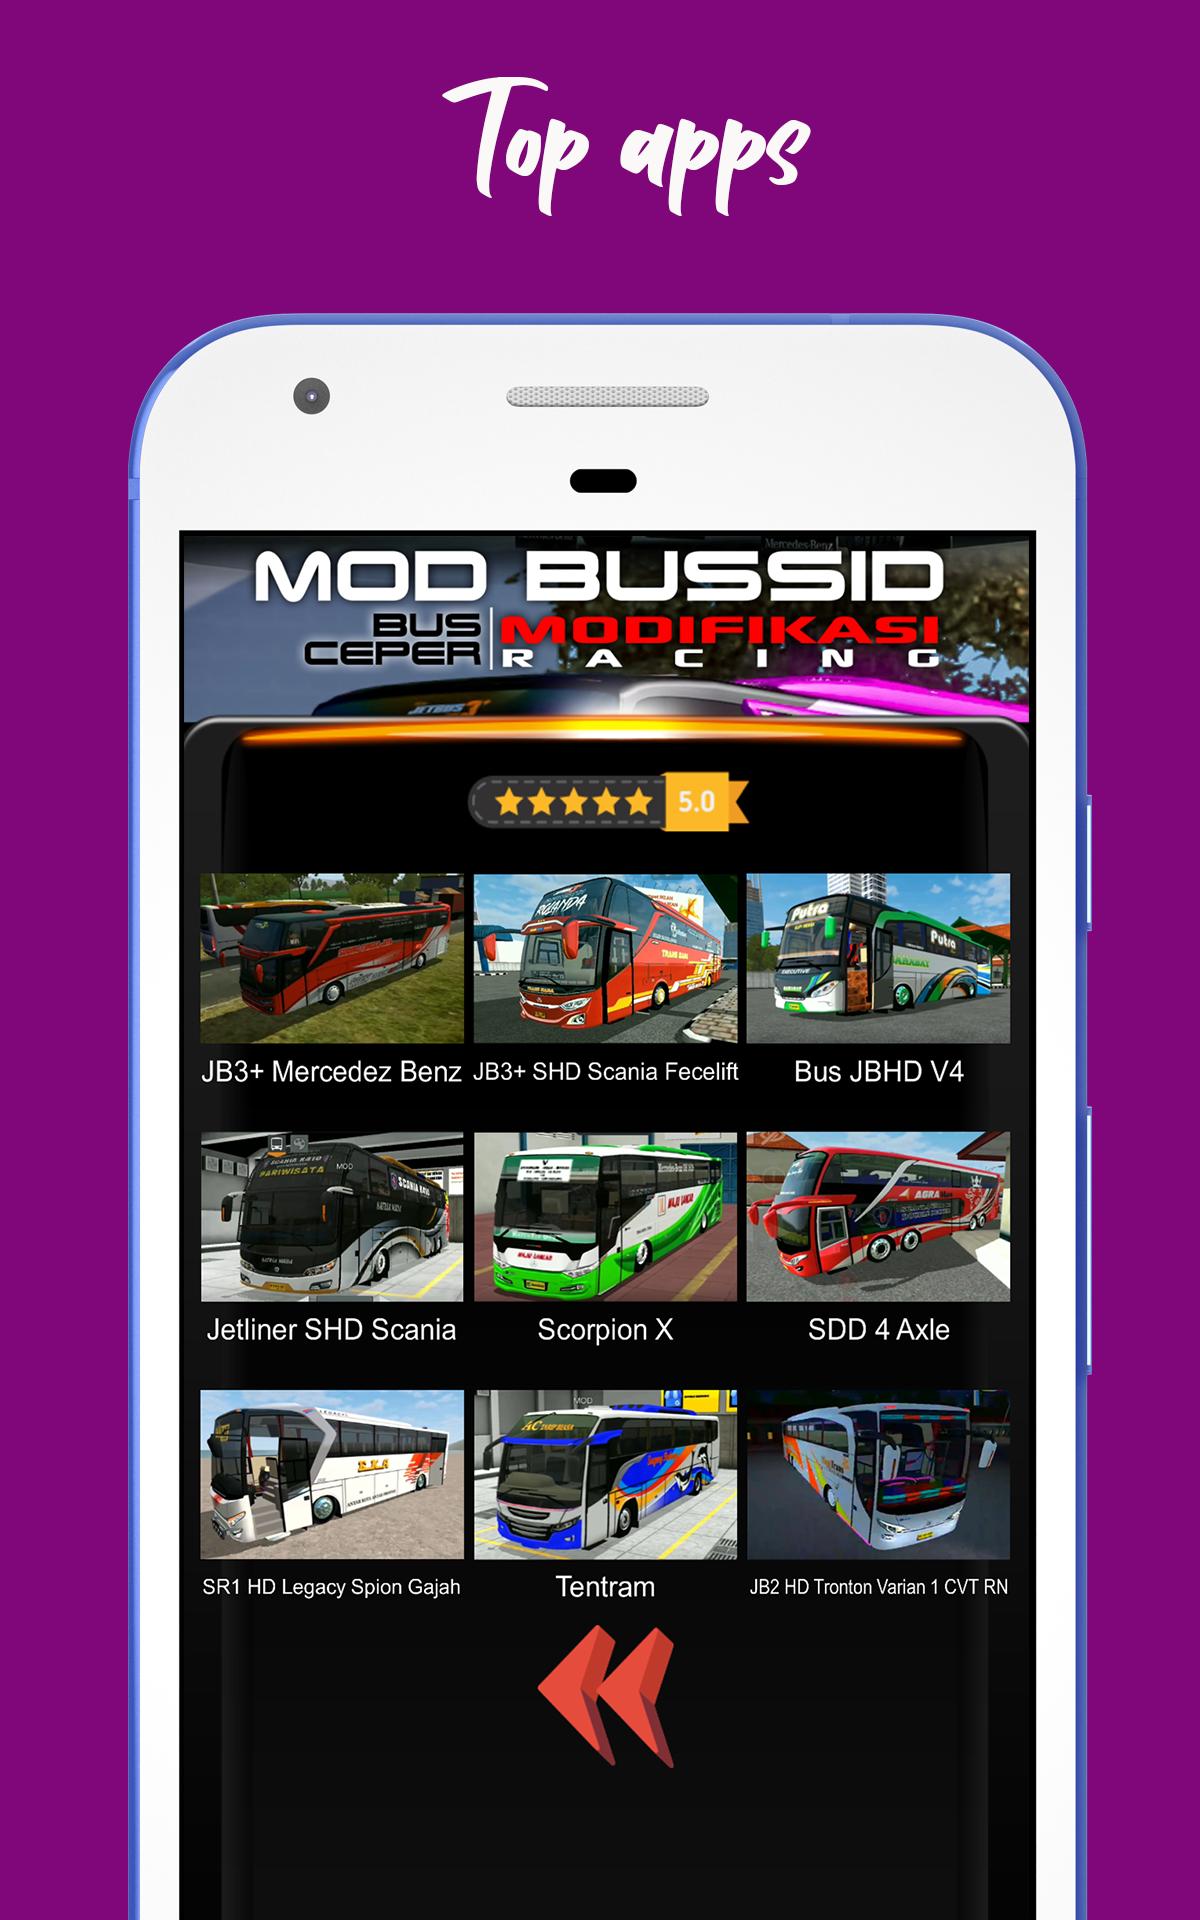 Mod Bussid Bus Ceper Modifikasi Racing for Android APK